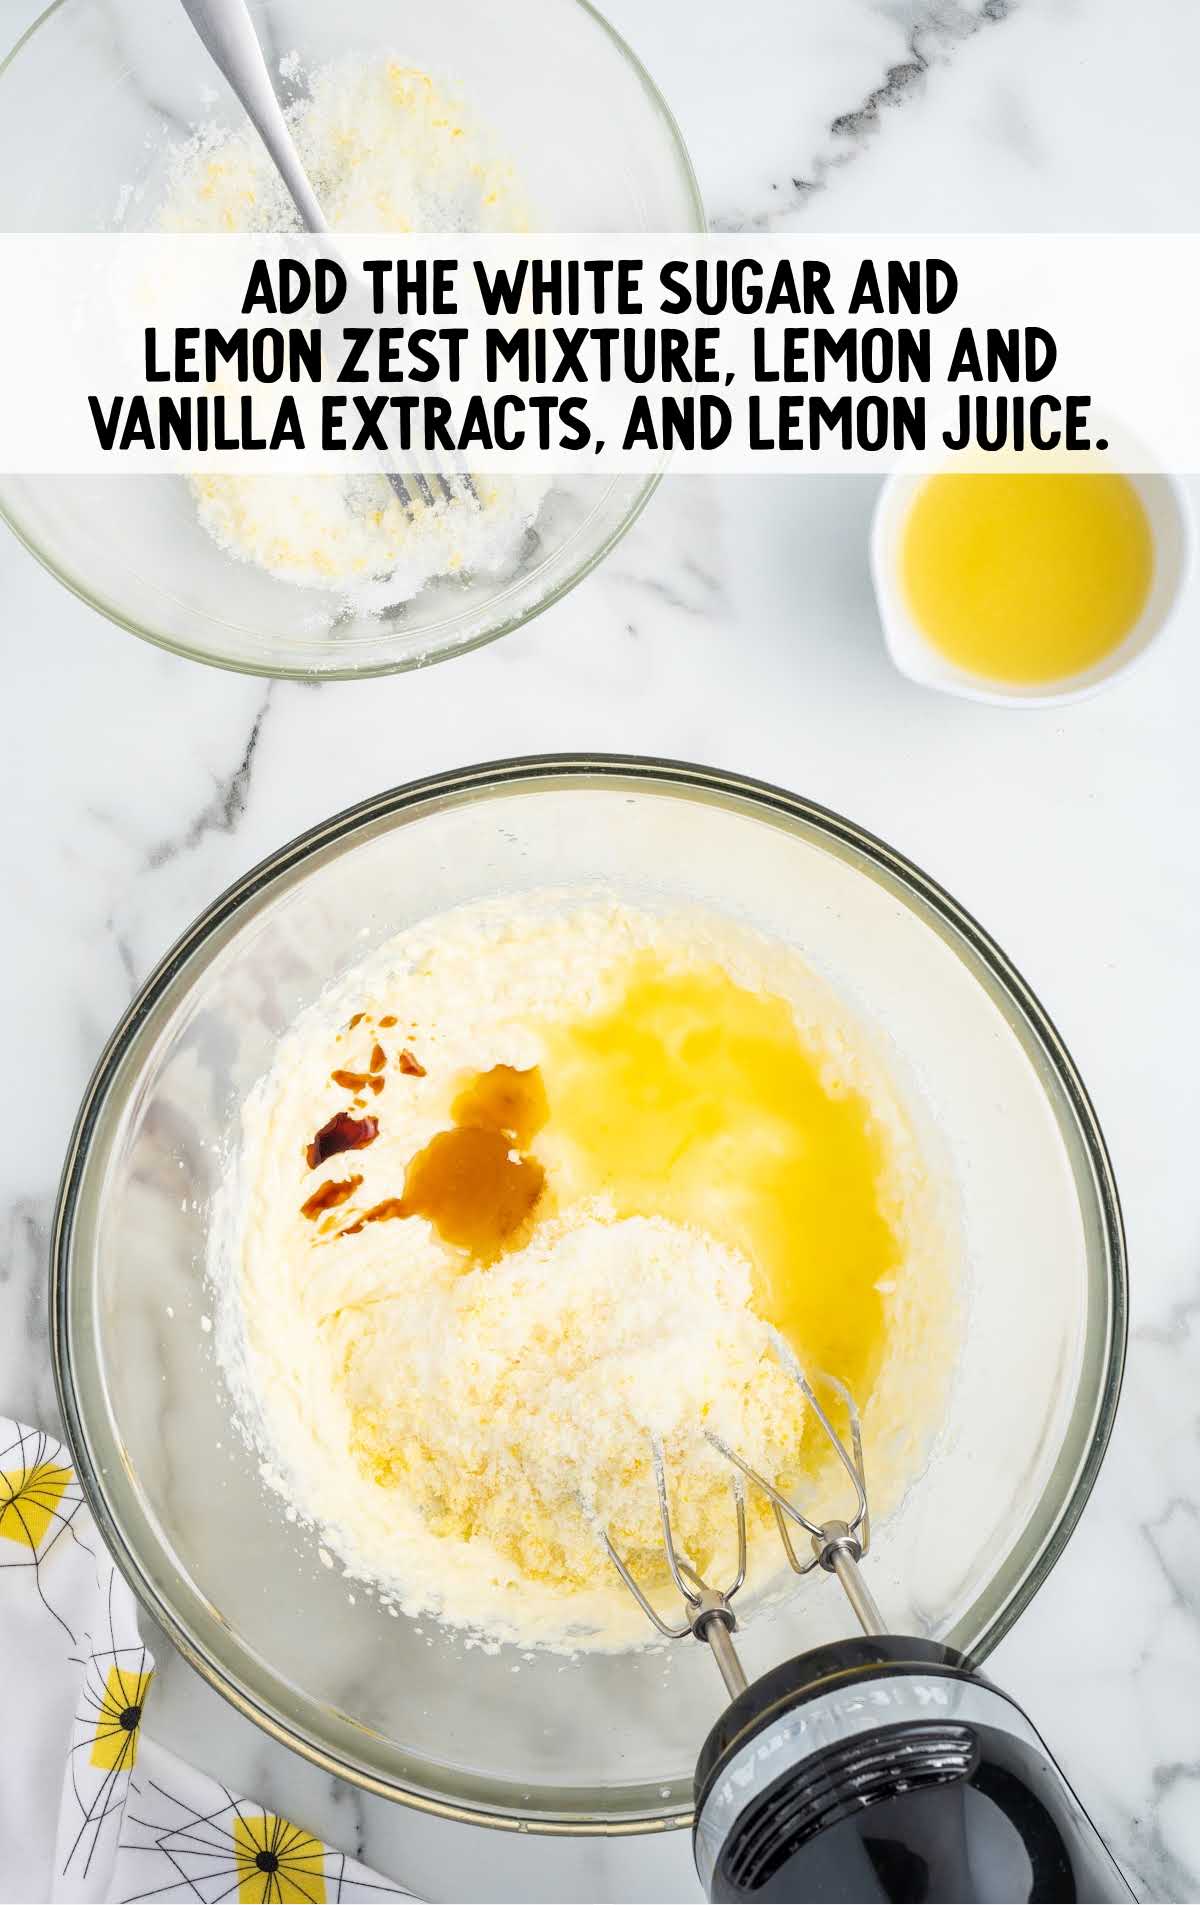 white sugar and lemon zest mixture, lemon and vanilla extract, and lemon juice combined together